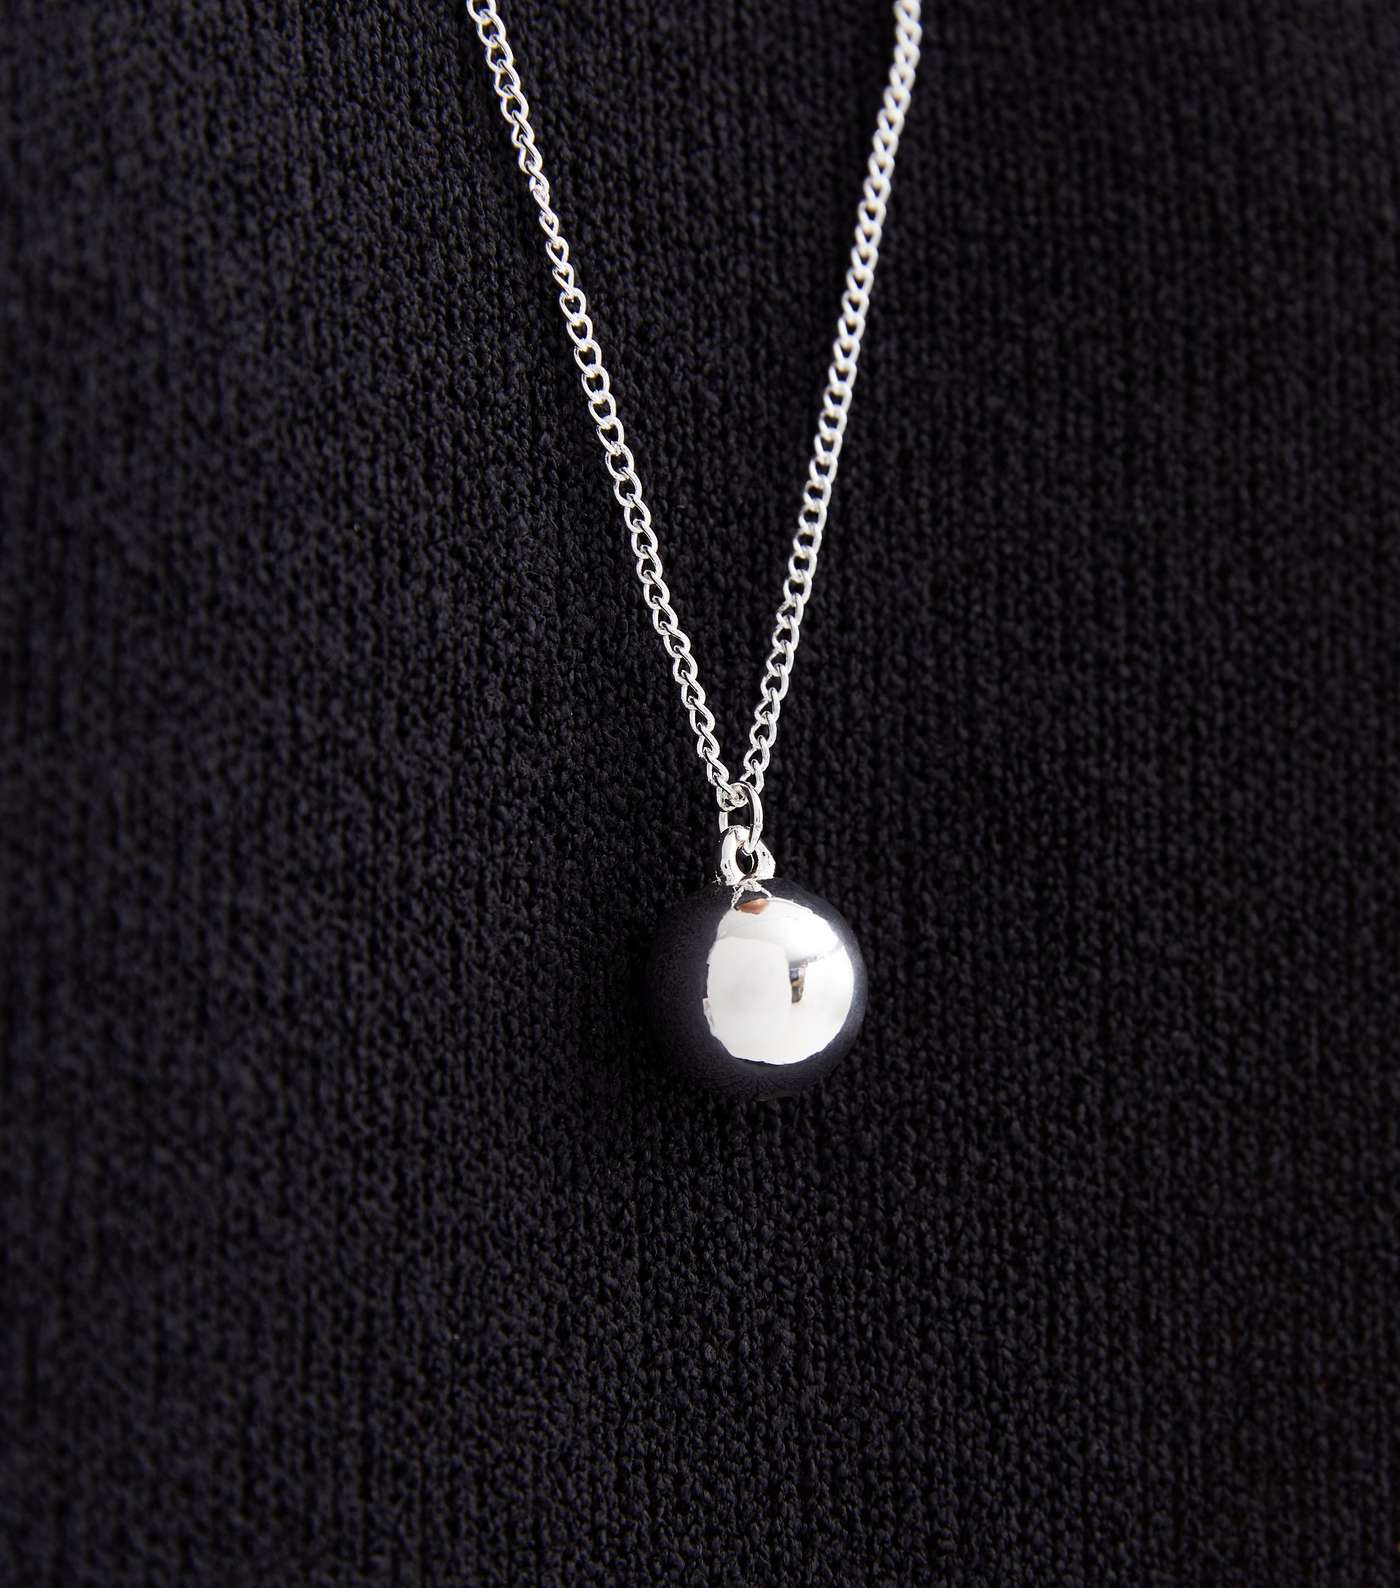 Silver Orb Pendant Necklace Image 2